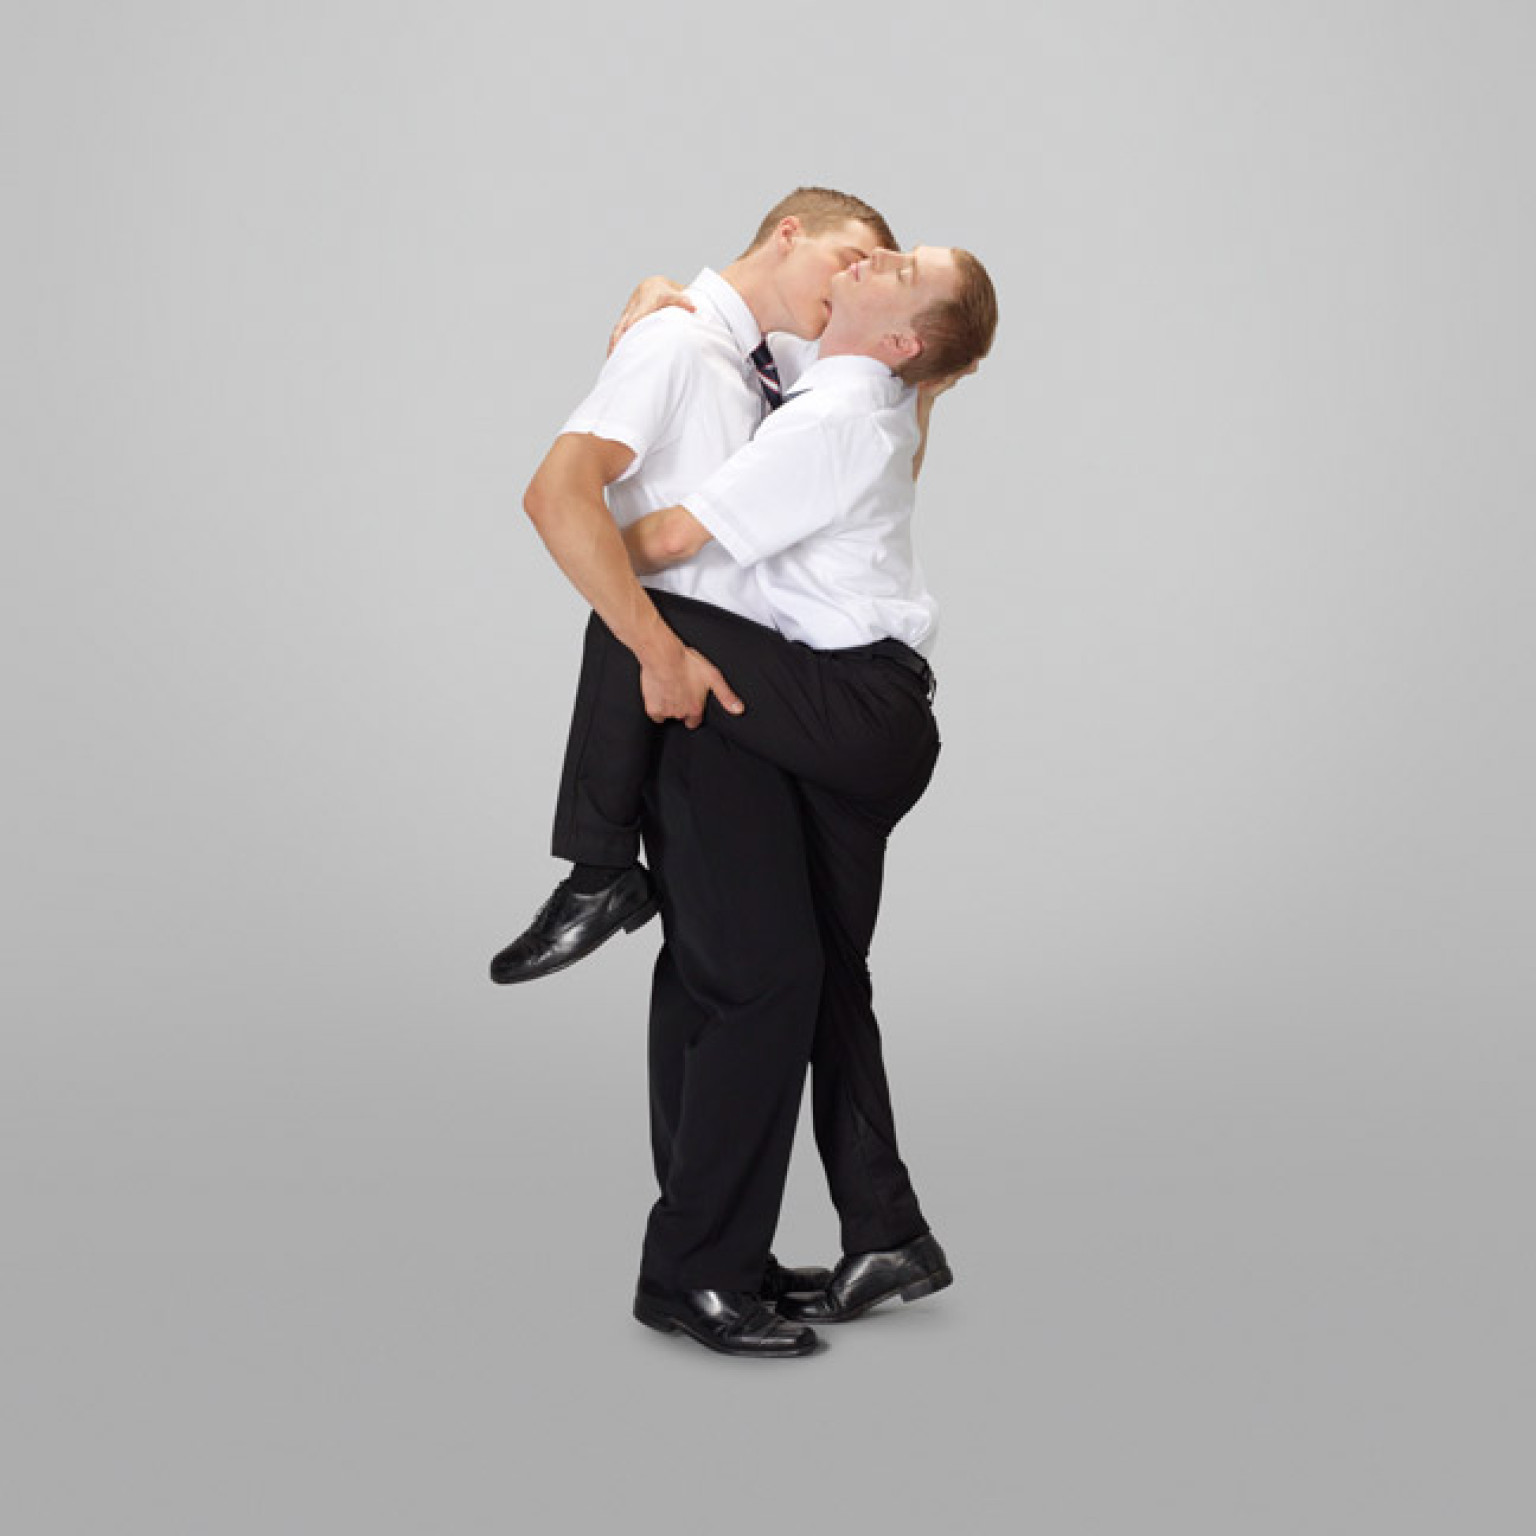 The Book Of Mormon Missionary Positions Shows Forbidden Gay 